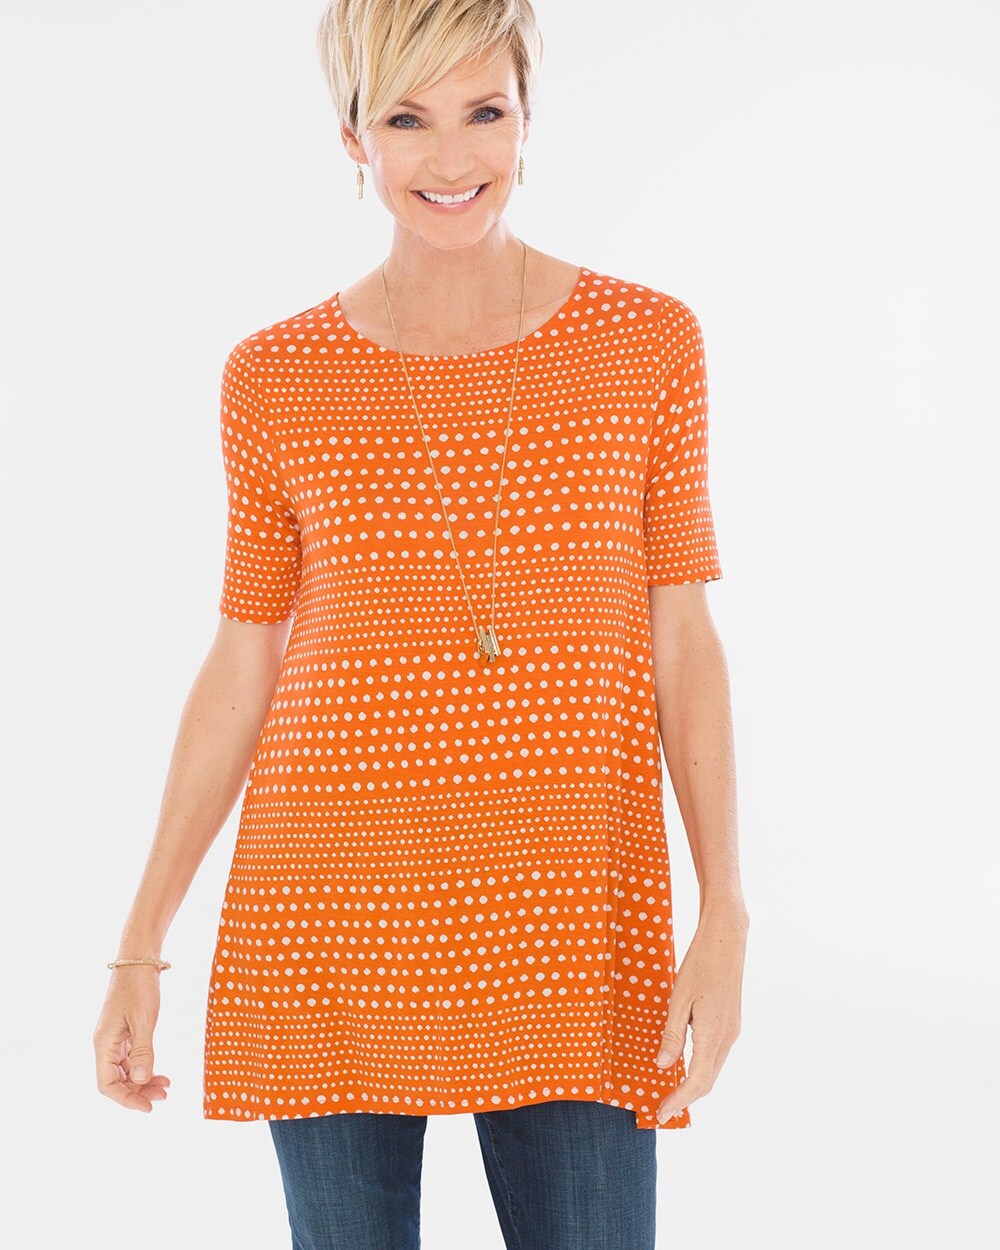 Striped Dots Easy Tee